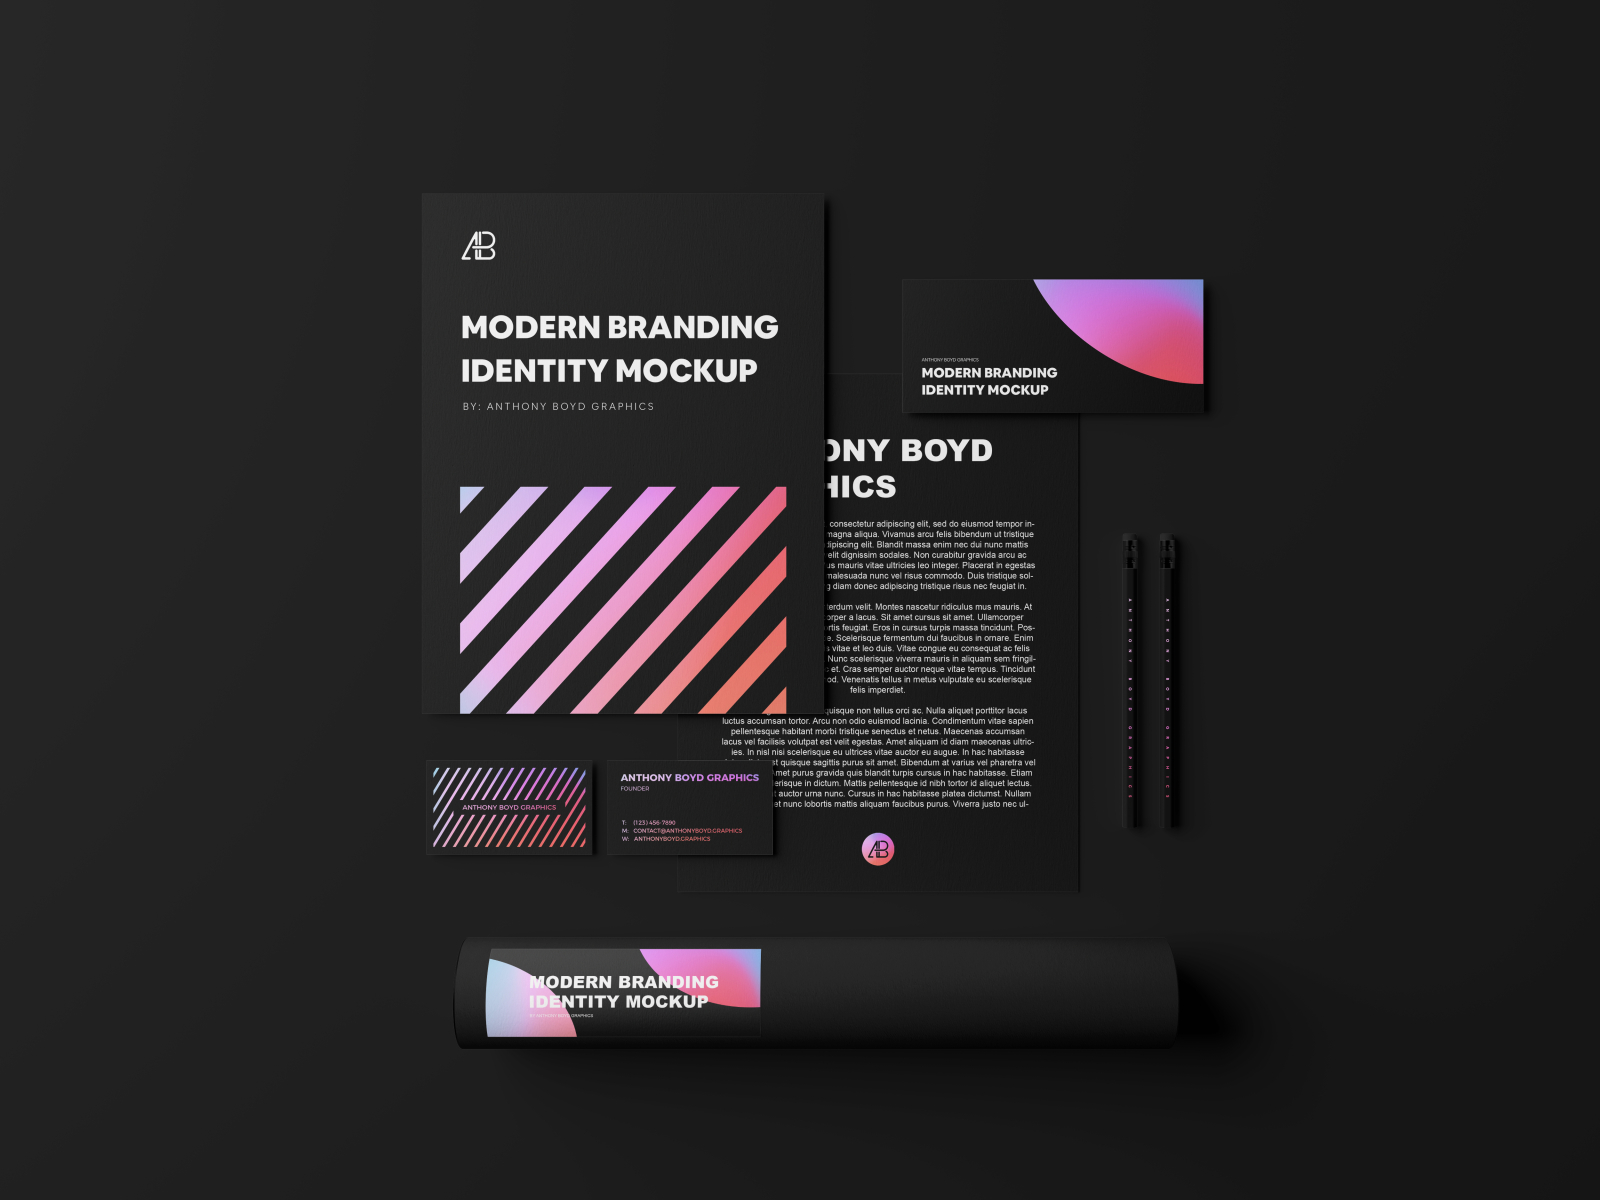 Download Modern Branding Identity Mockup Vol 4 by Anthony Boyd Graphics on Dribbble